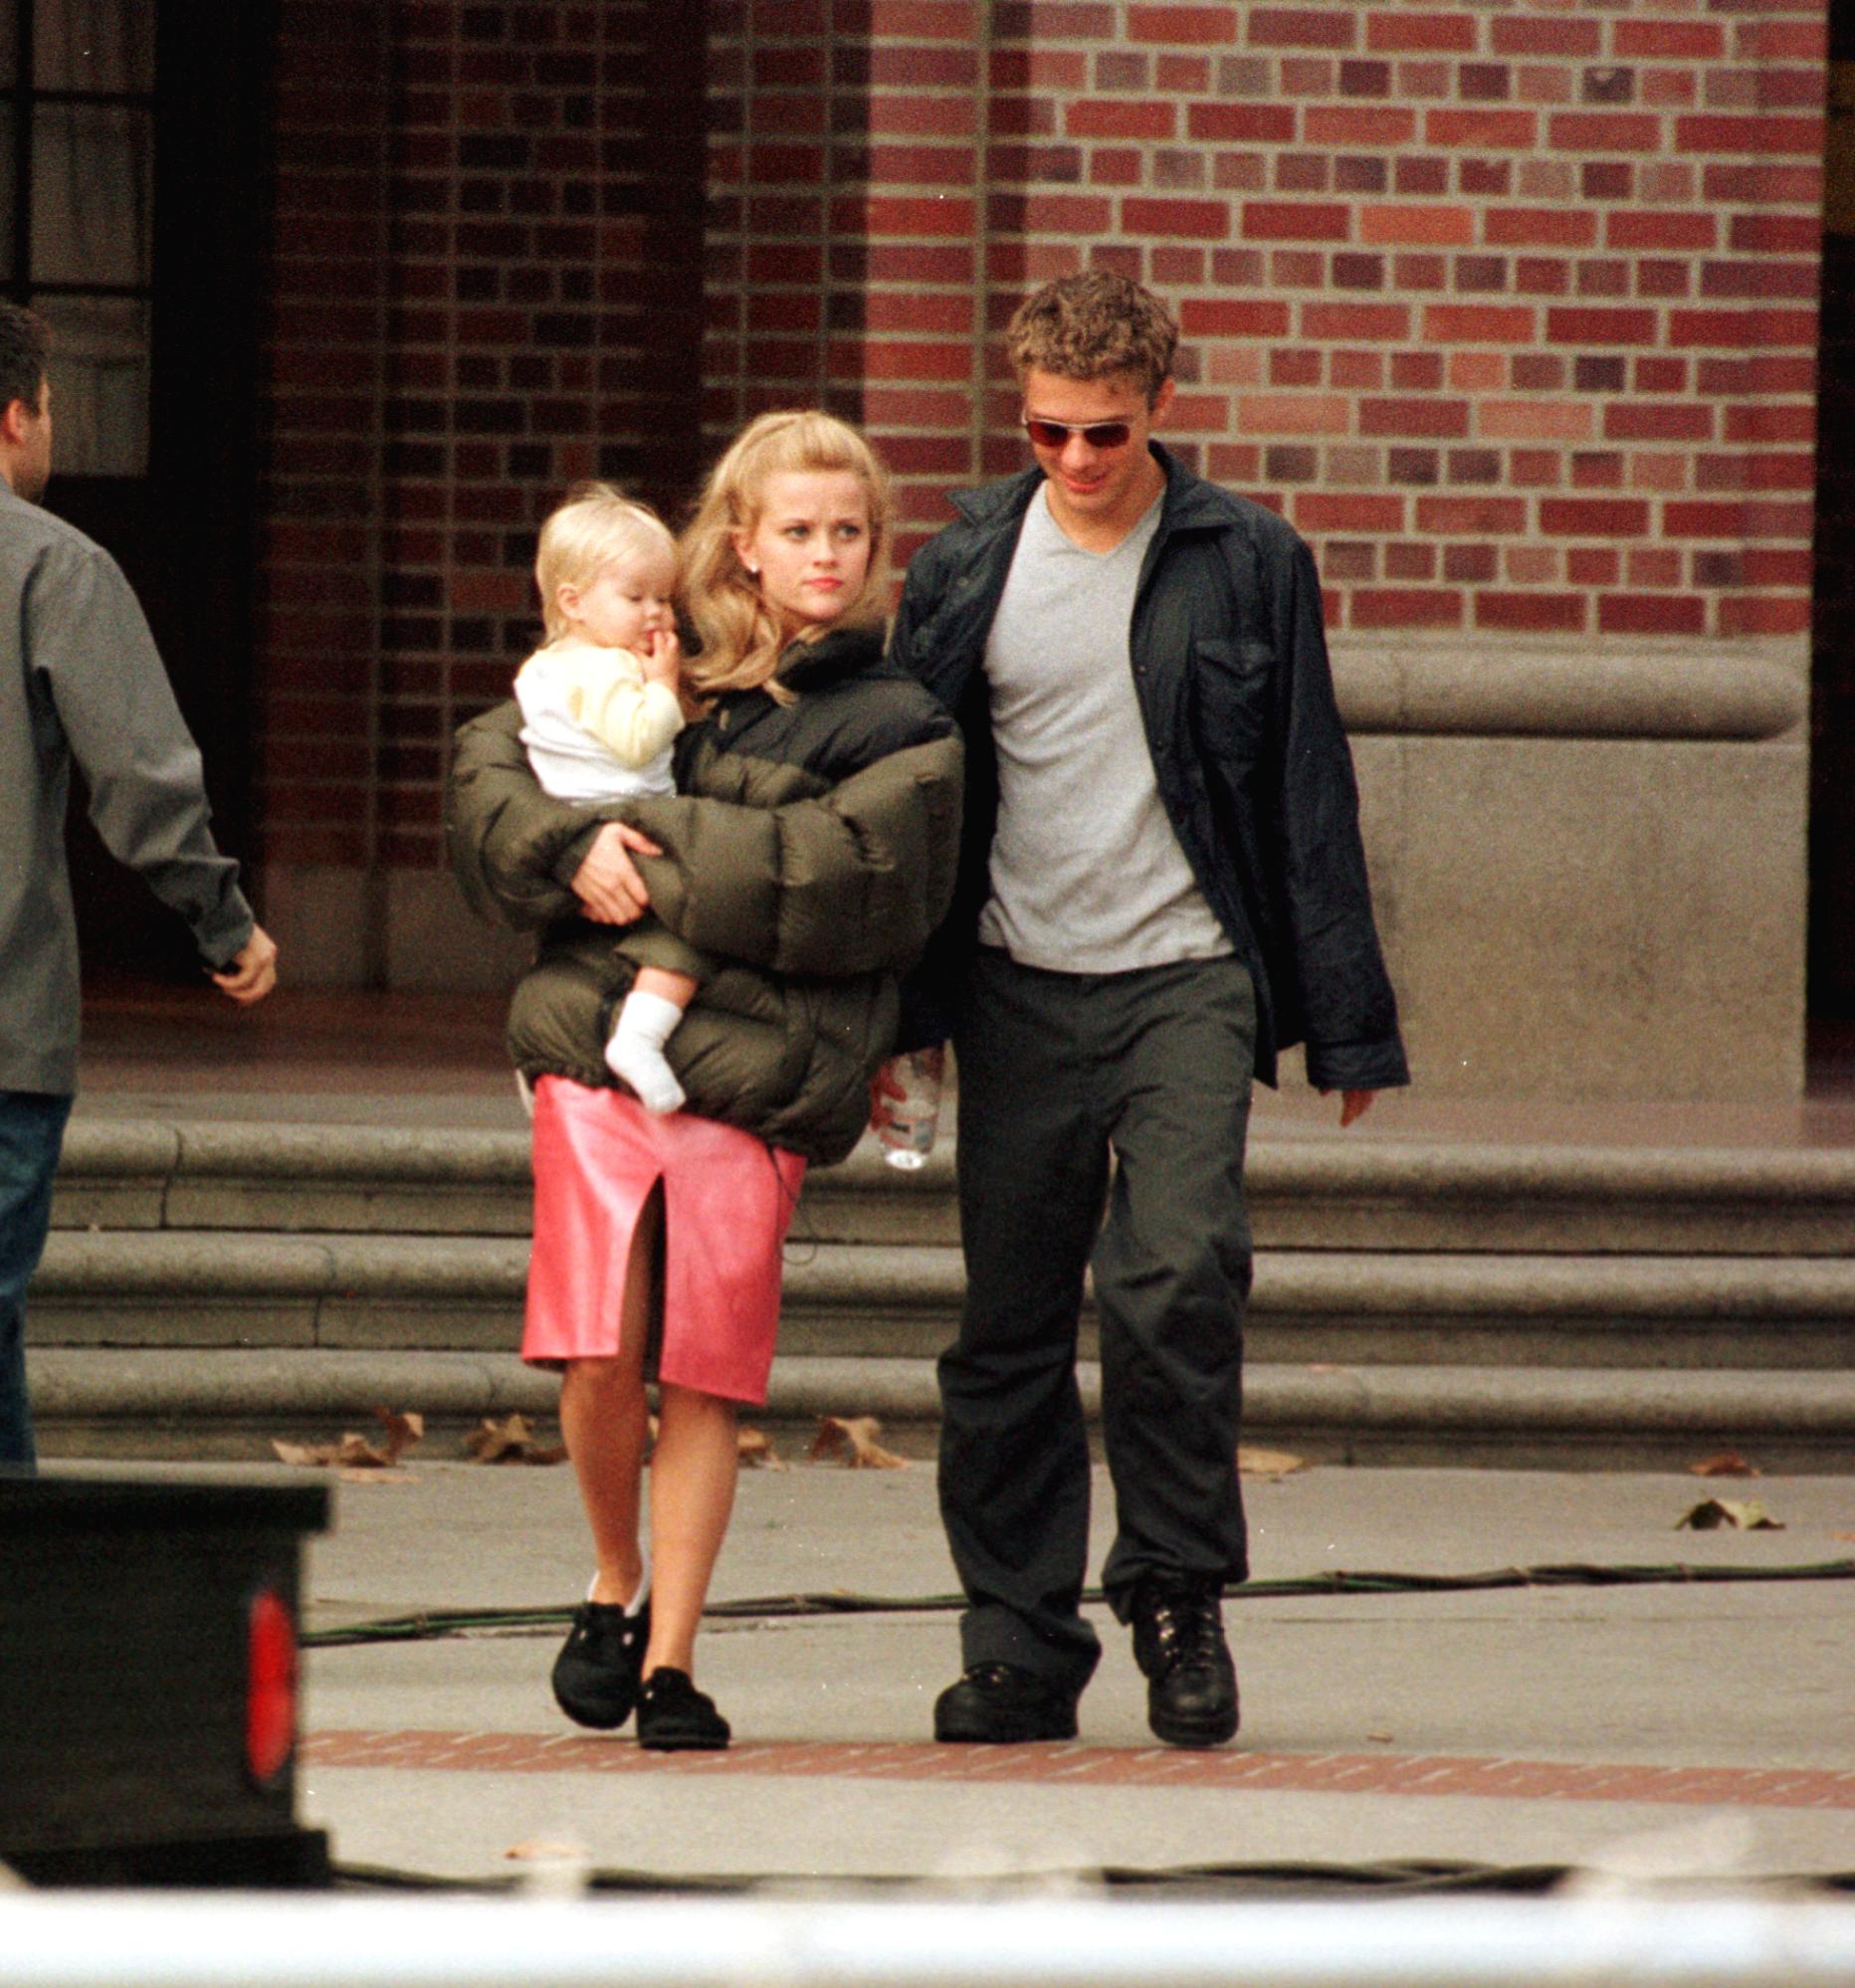 Actress Reese Witherspoon, her husband Ryan Philippe, and their child on the set of "Legally Blonde" in Los Angeles on October 21, 2000 | Source: Getty Images